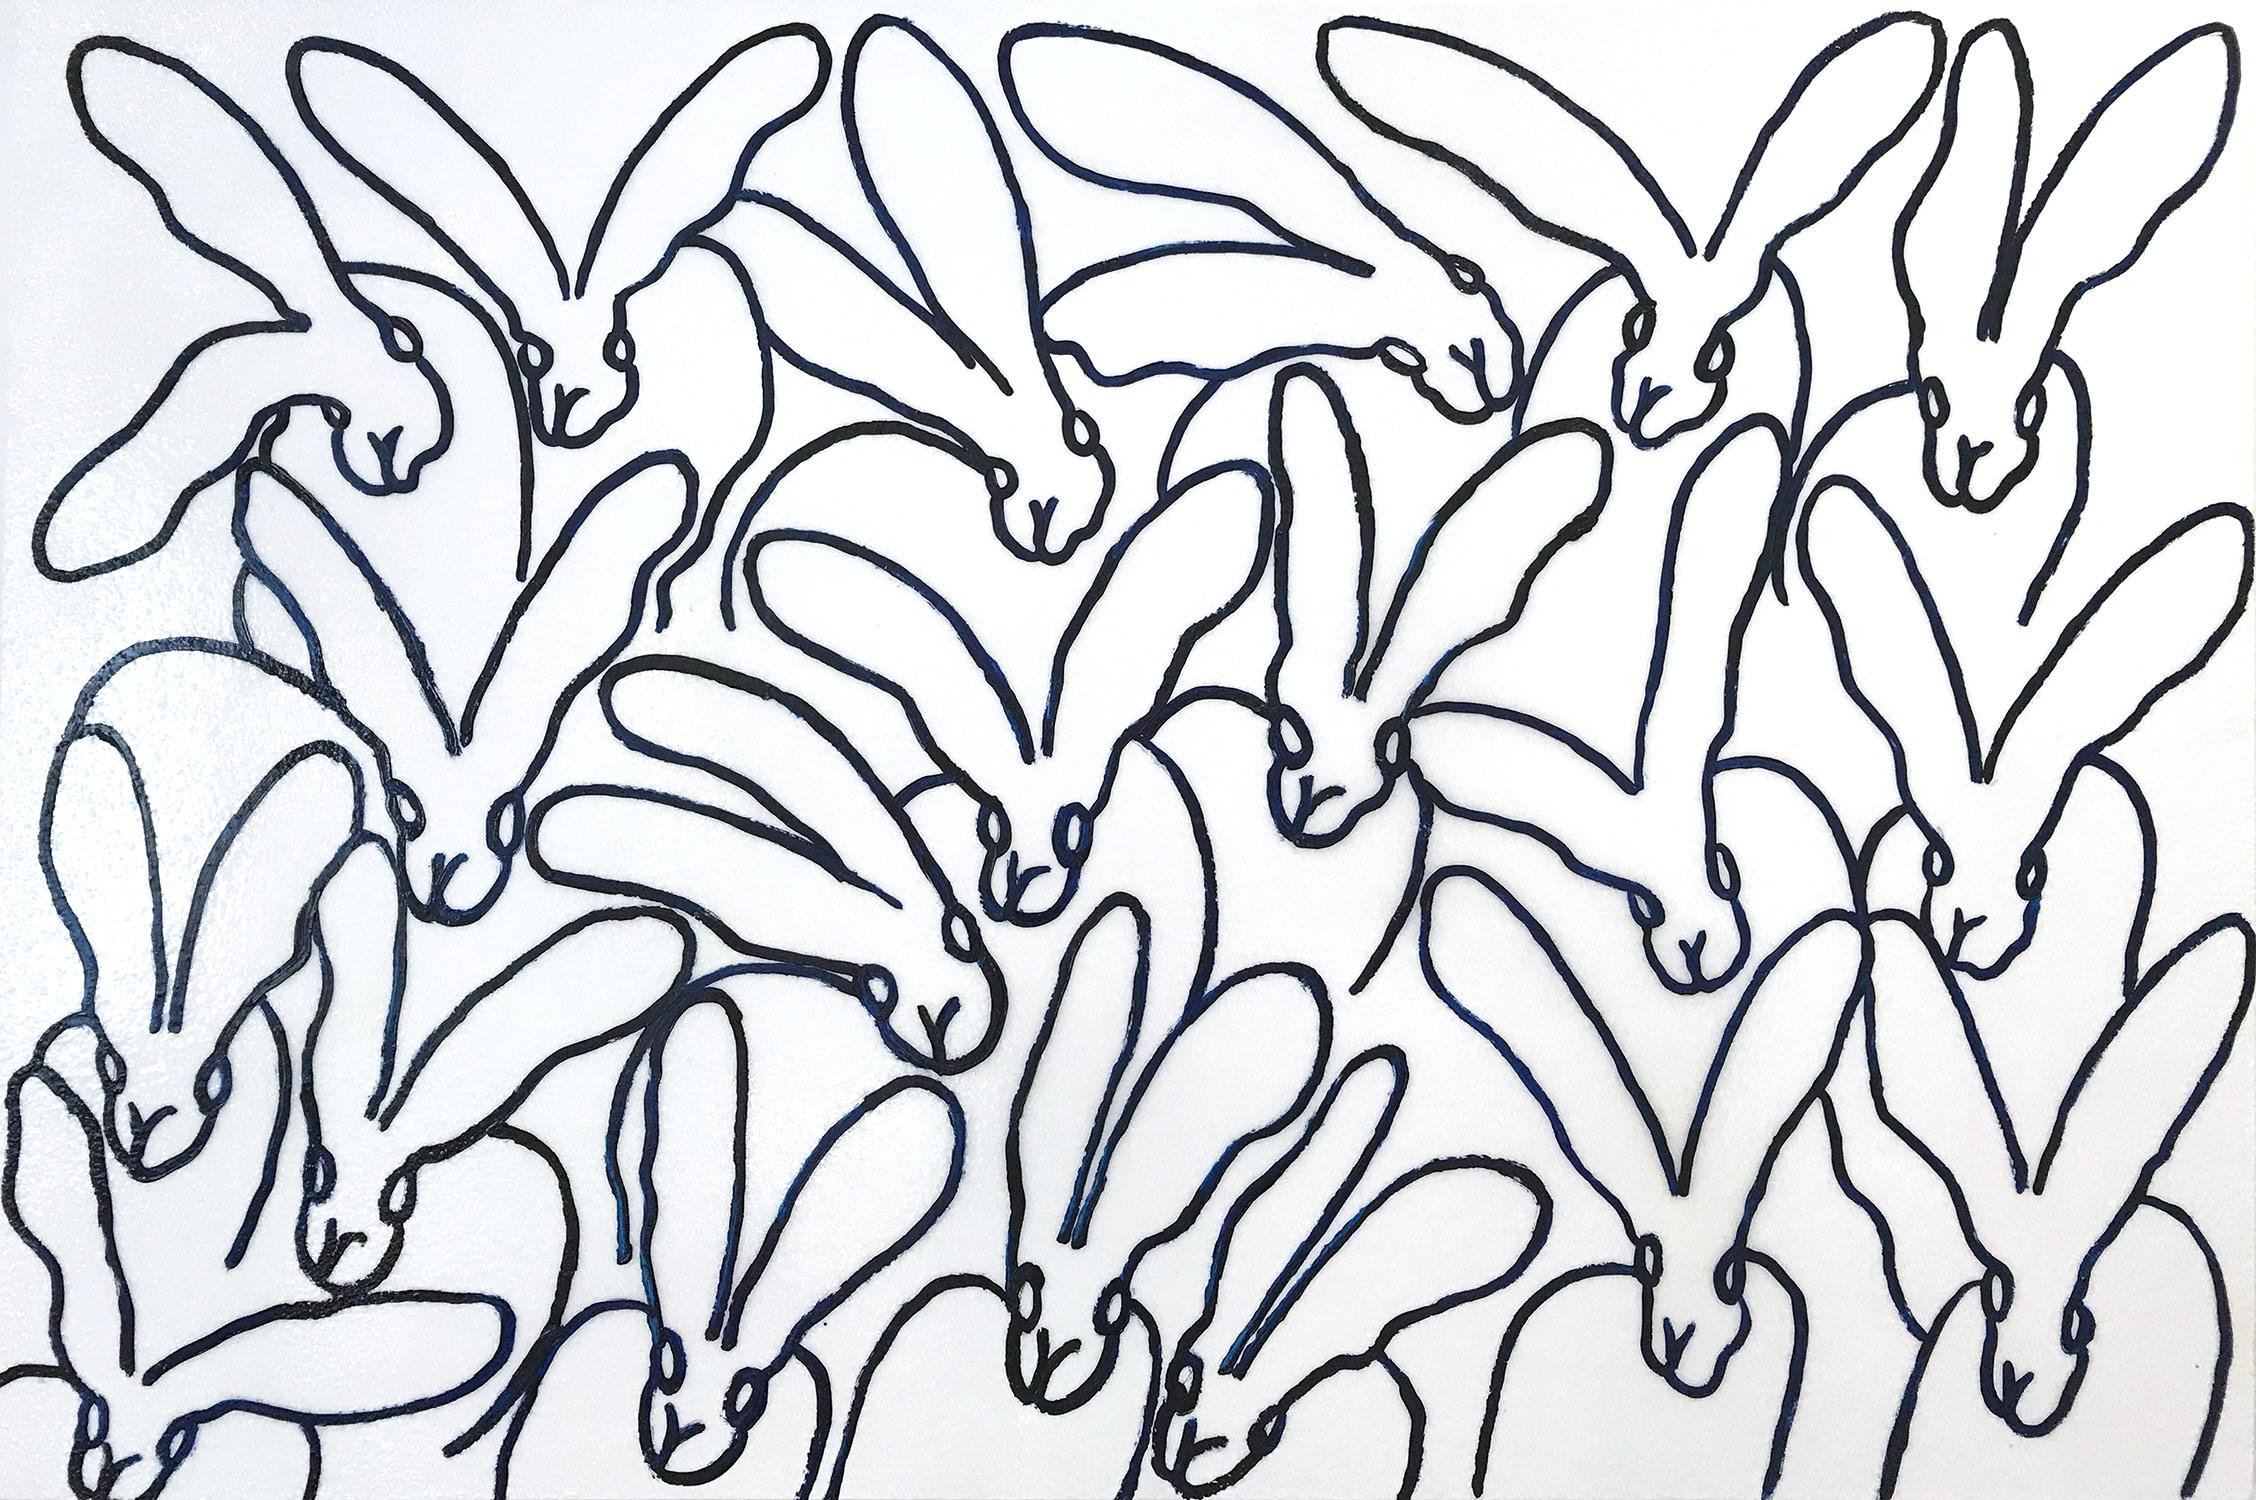 Hunt Slonem Animal Painting - "Blue Line 2" Prussian Blue Outlined Bunnies on White Diamond Dust Background